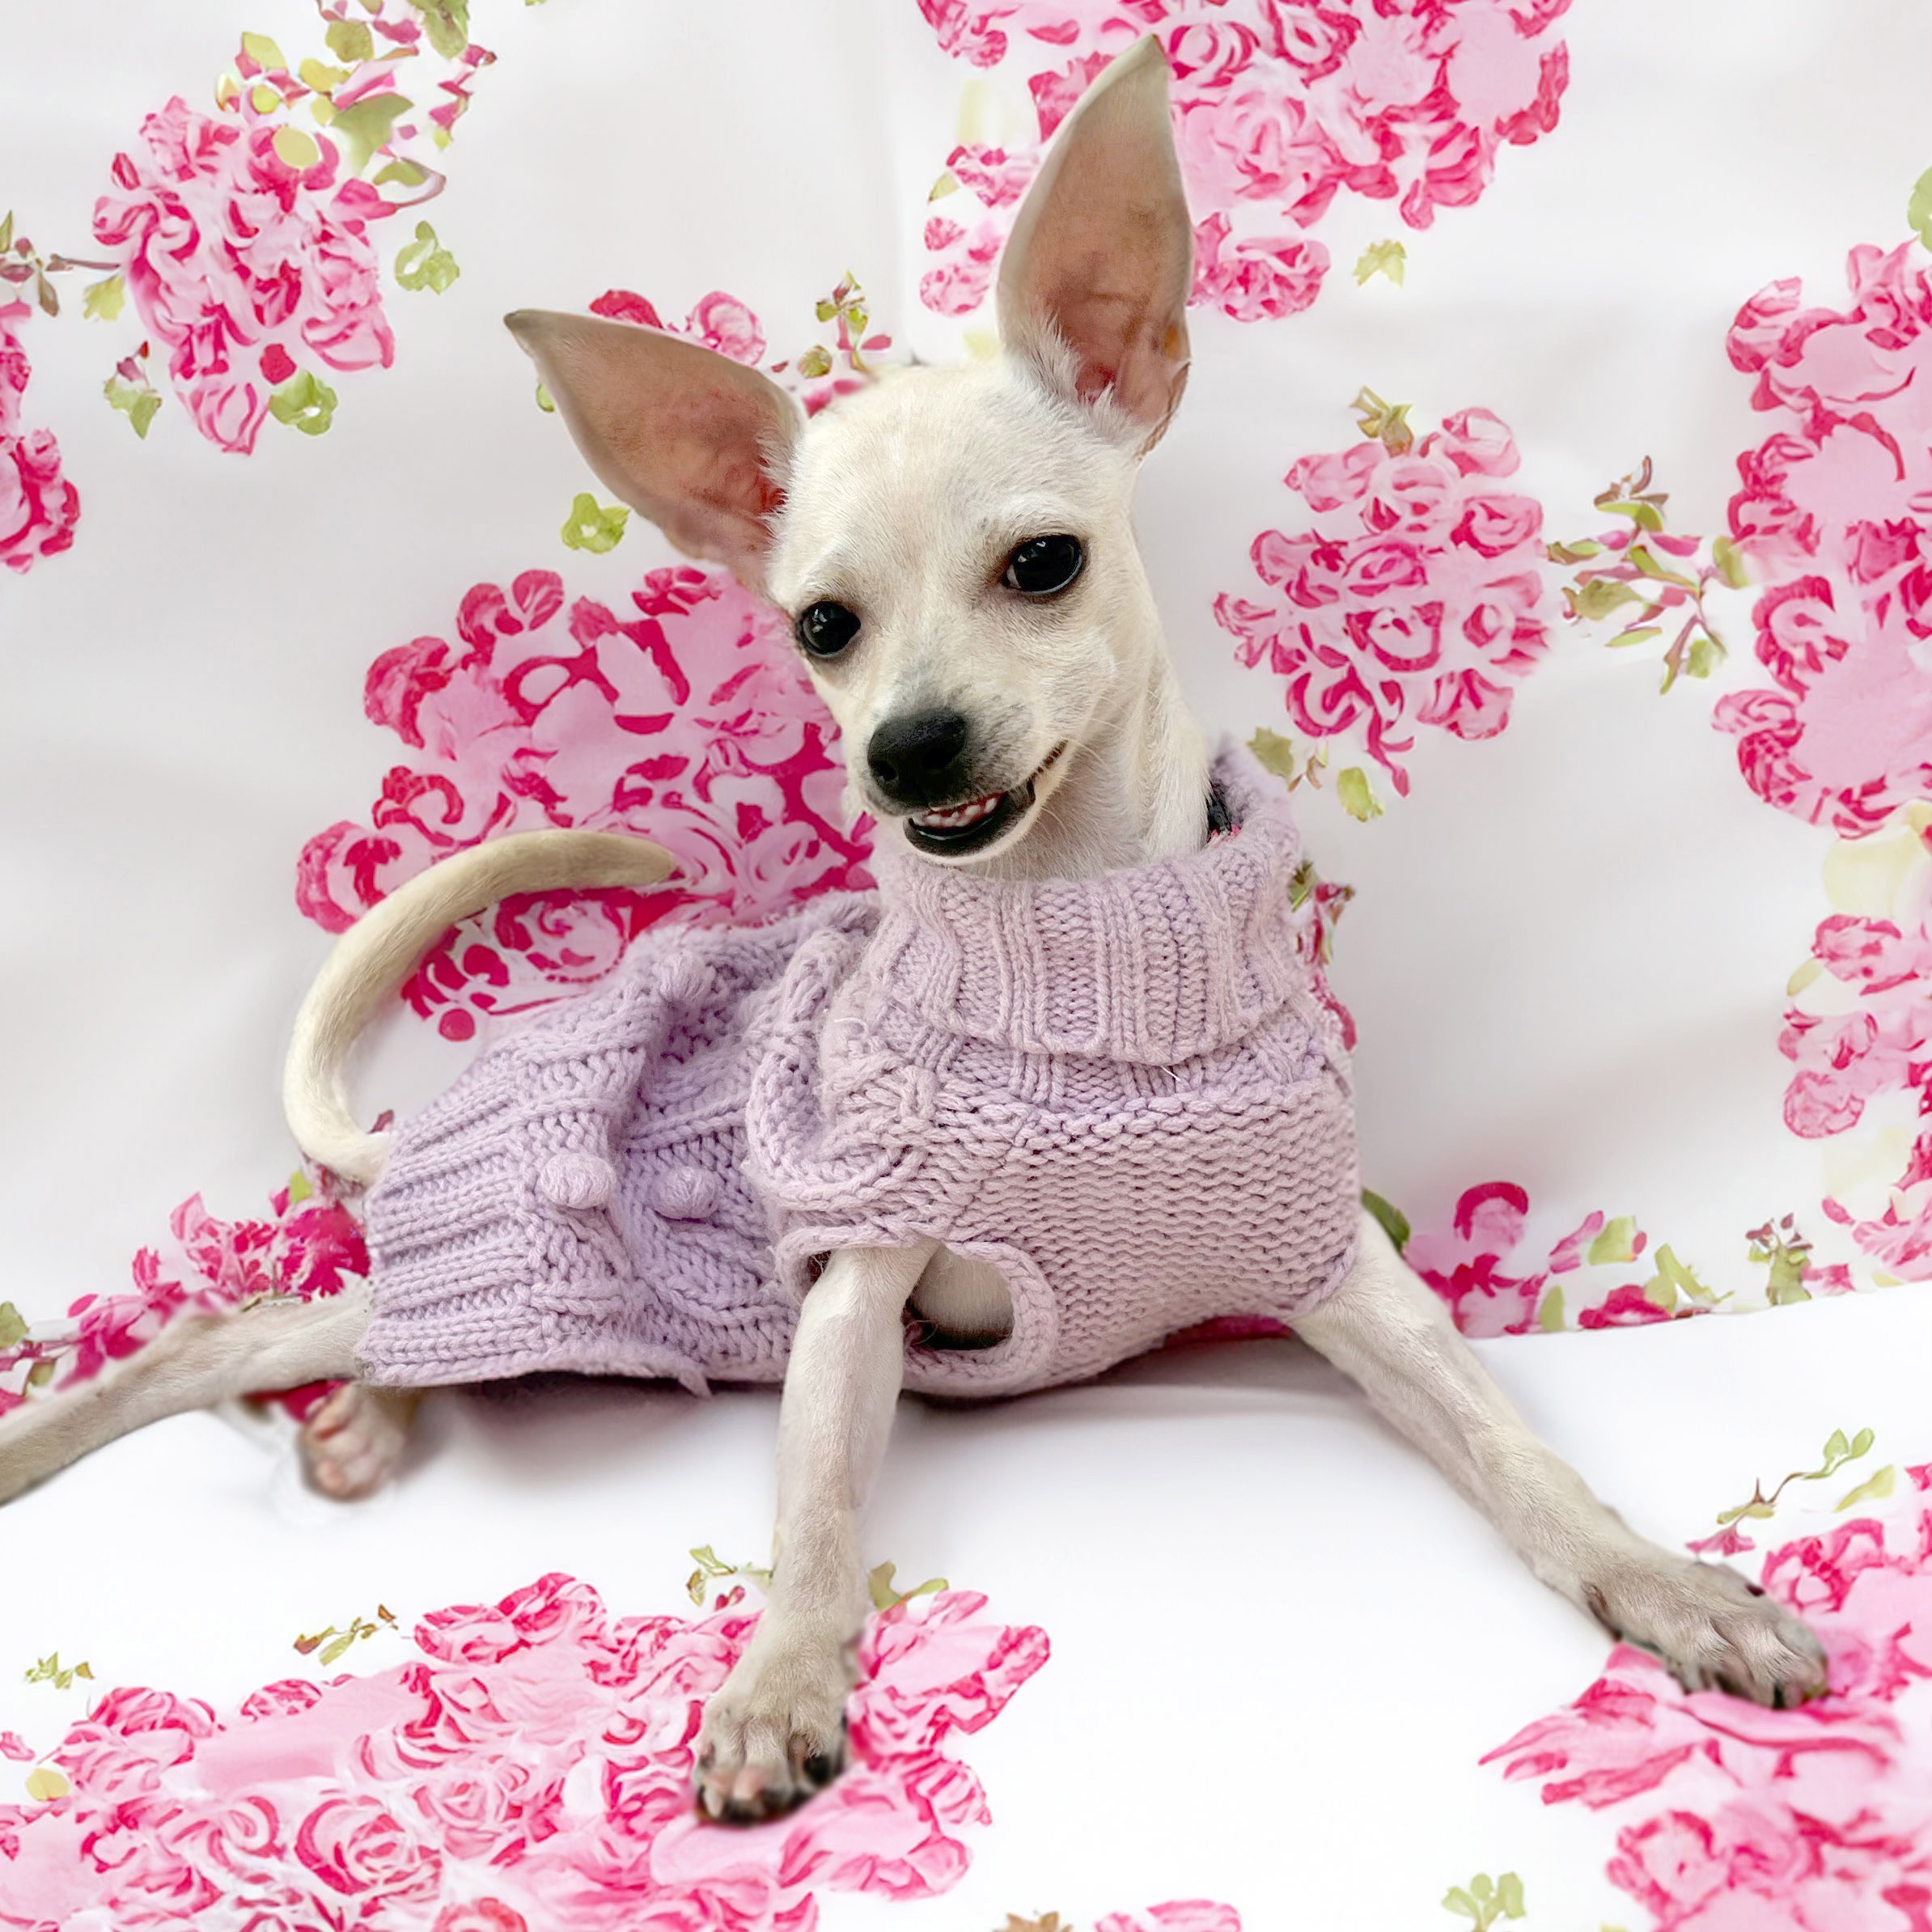 Chihuahua puppy in a pink sweater